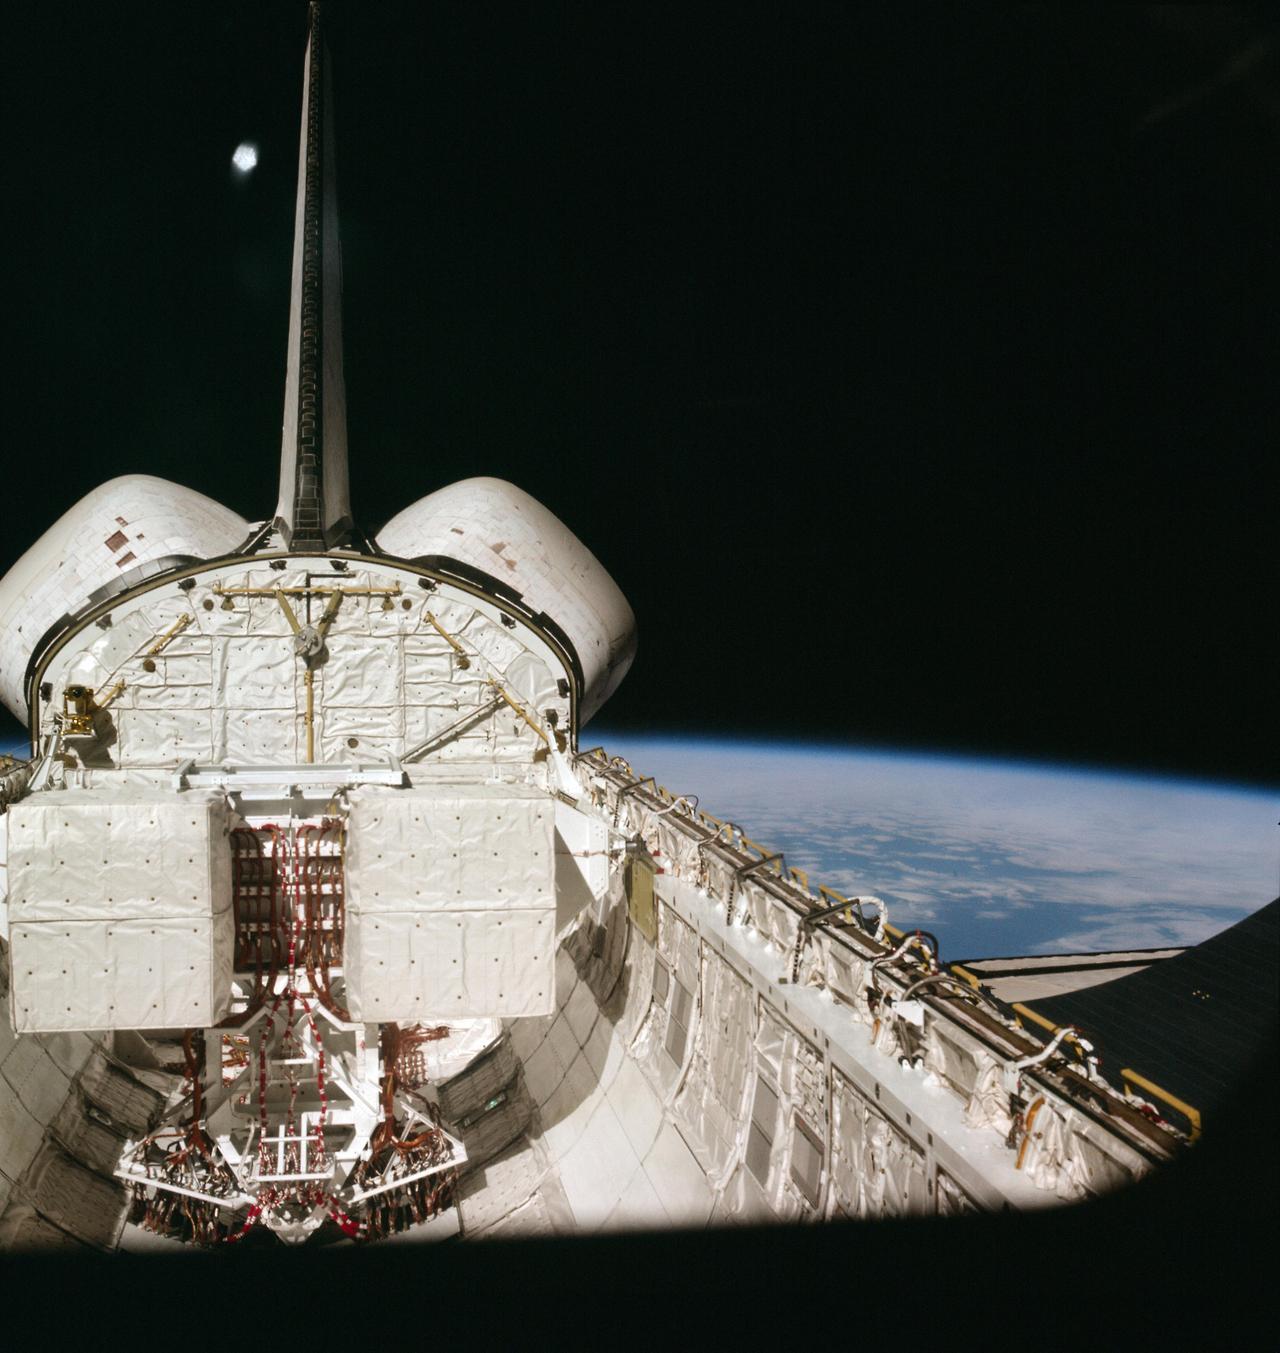 photos-of-space:
“Space Shuttle Columbia during her inaugural orbital mission (STS-1, April 12, 1981). Notice the missing TPS tiles on the OMS pods [4138x4374]
”